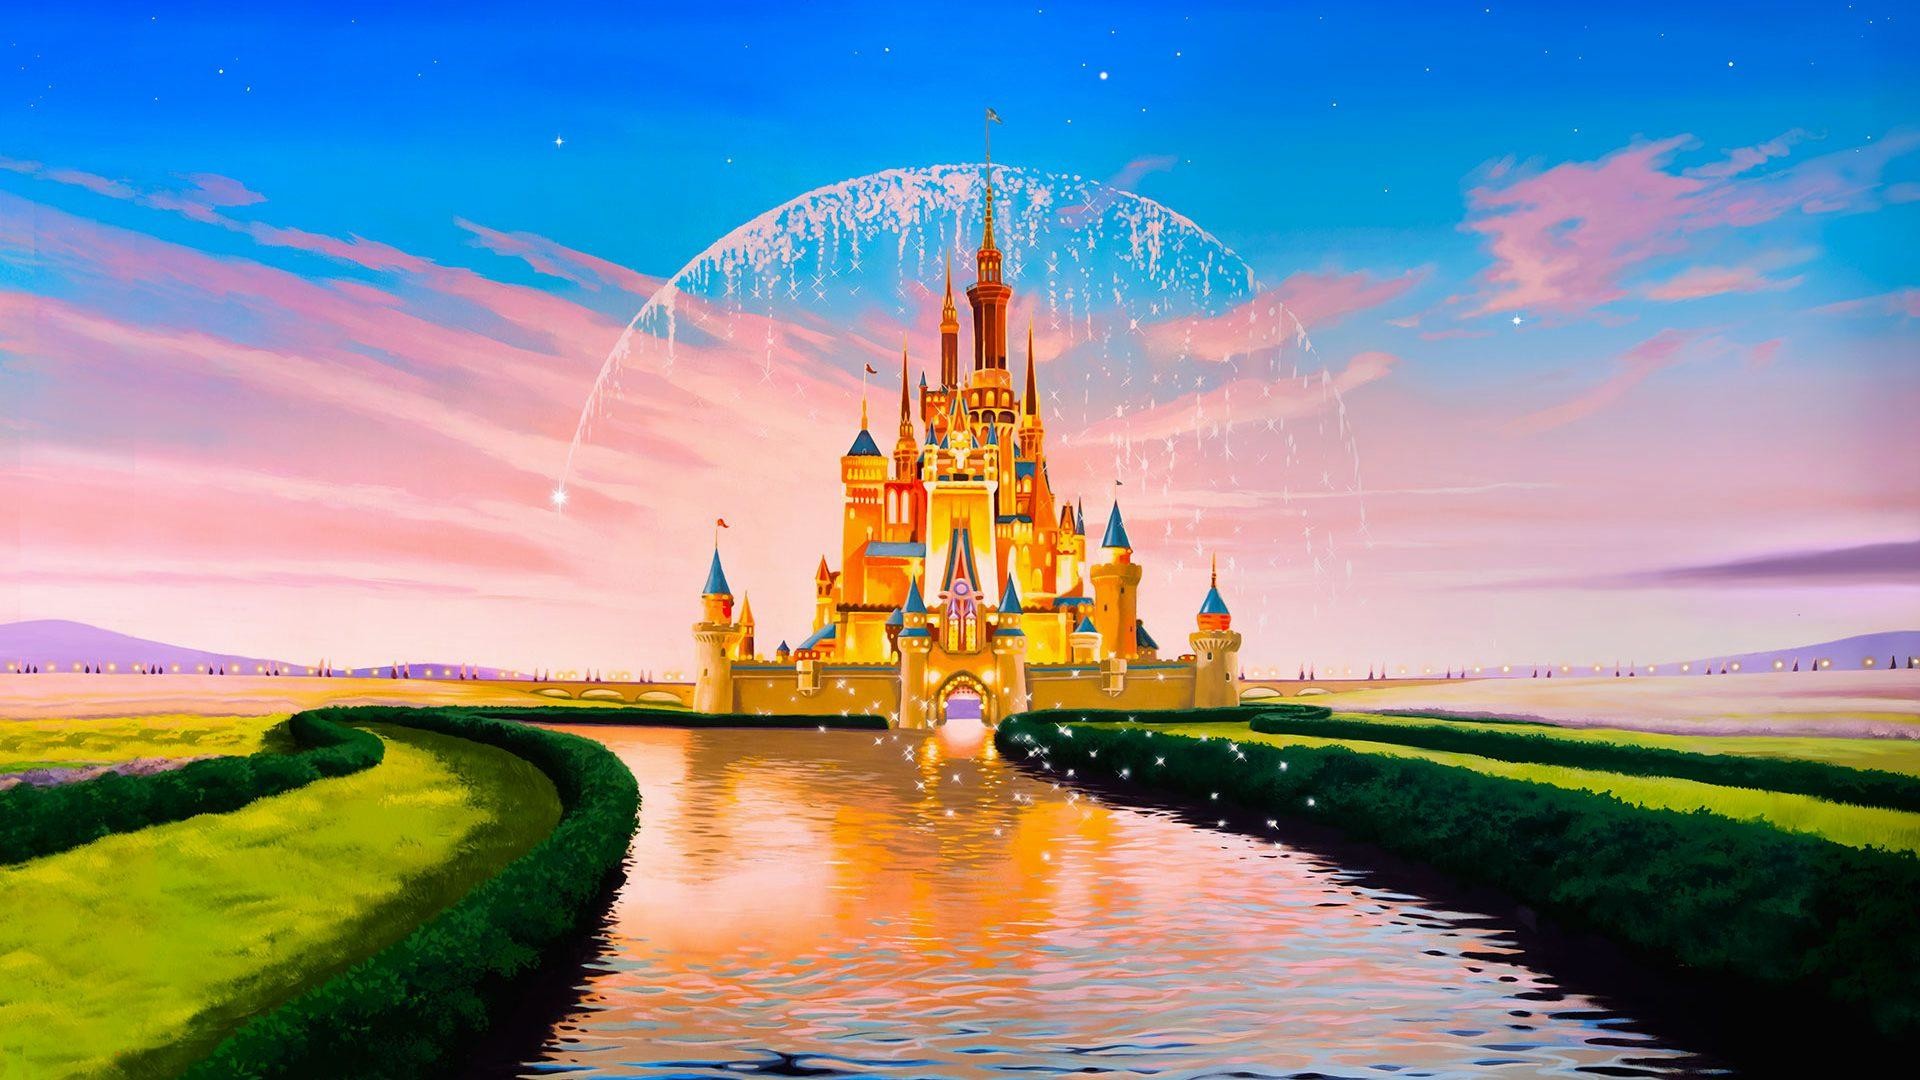 1920x1080 wallpaper.wiki-Disney-castle-images-wallpapers--PIC-